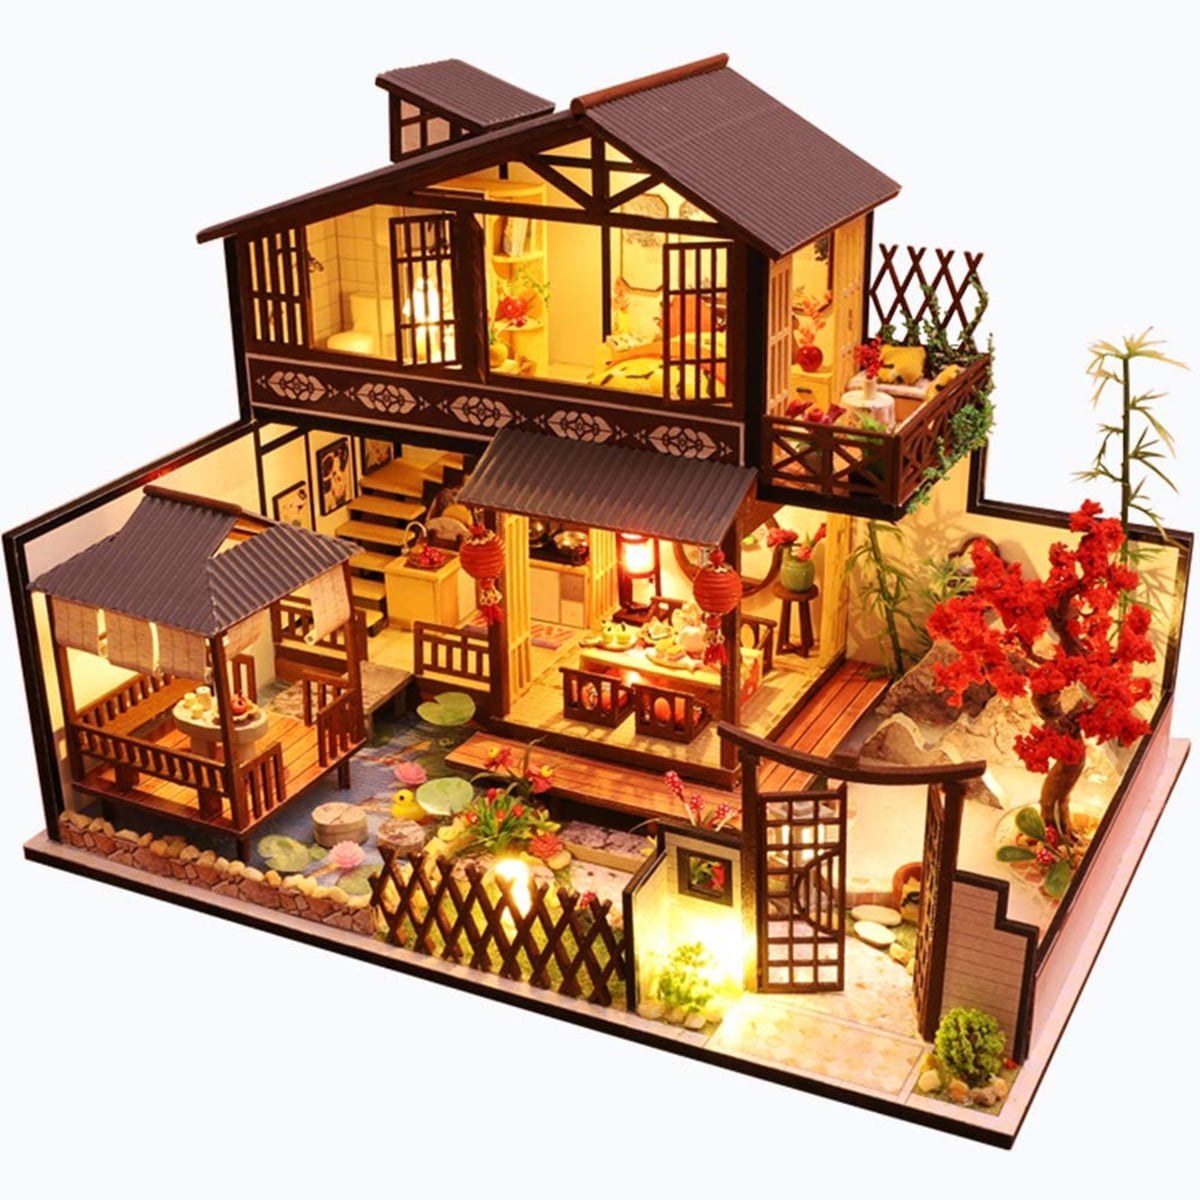 DIY Wooden Miniature Dollhouse Villa Model With Furniture Kid Toy Christmas Gift 